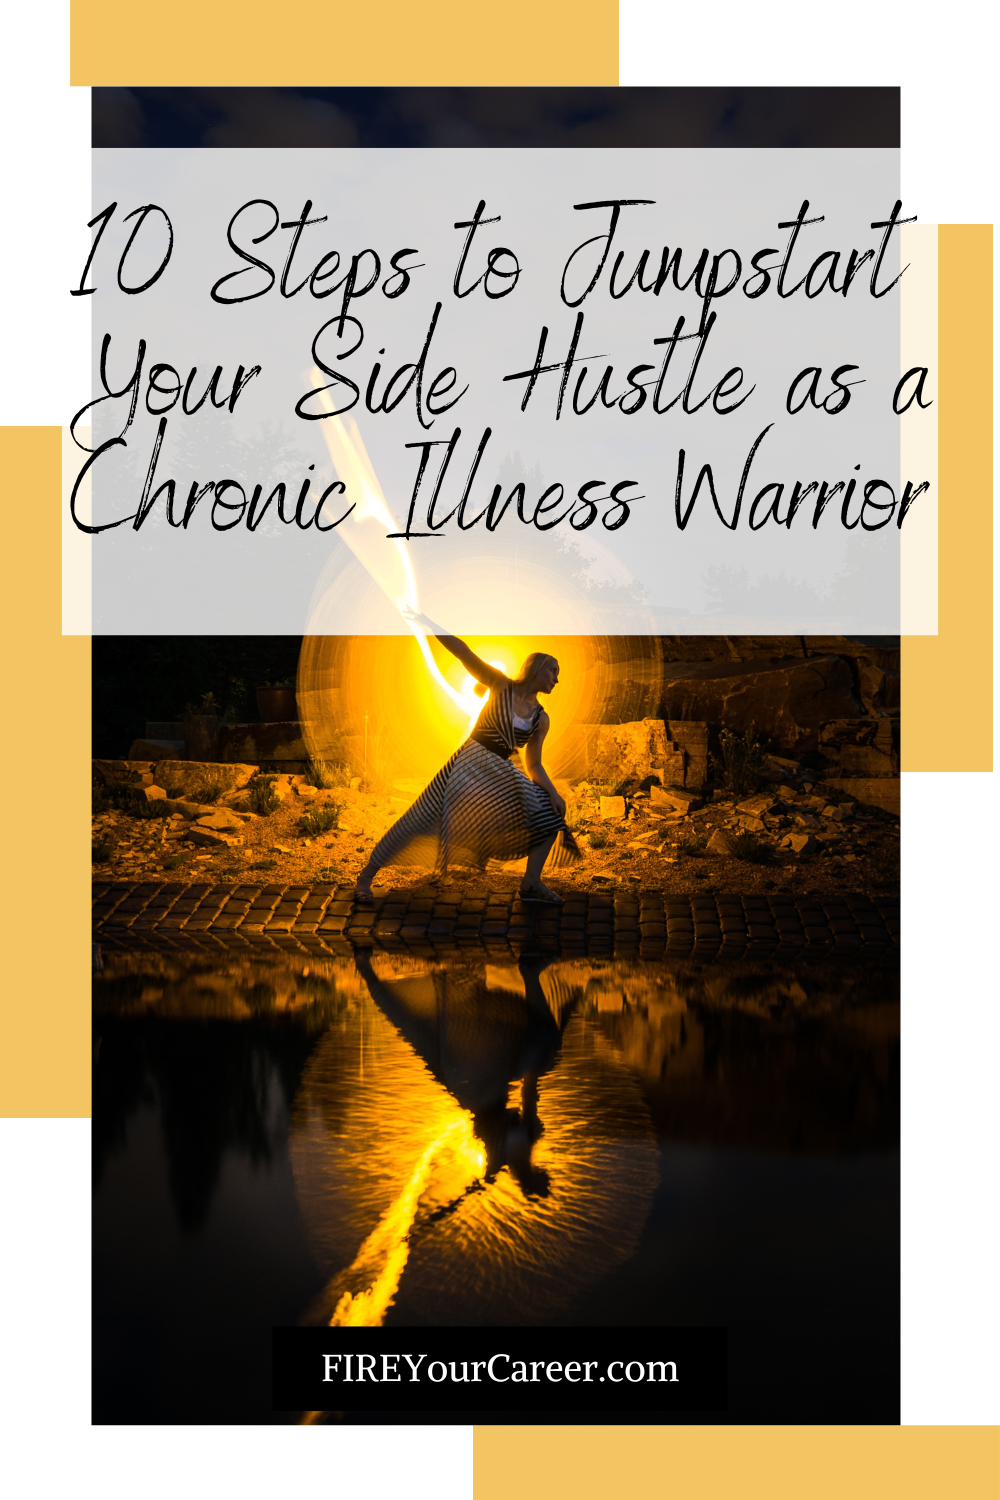 V2 10 Simple Steps You Can Follow as a Chronic Illness Warrior to Jumpstart Your Side Hustle Pinterest (1)